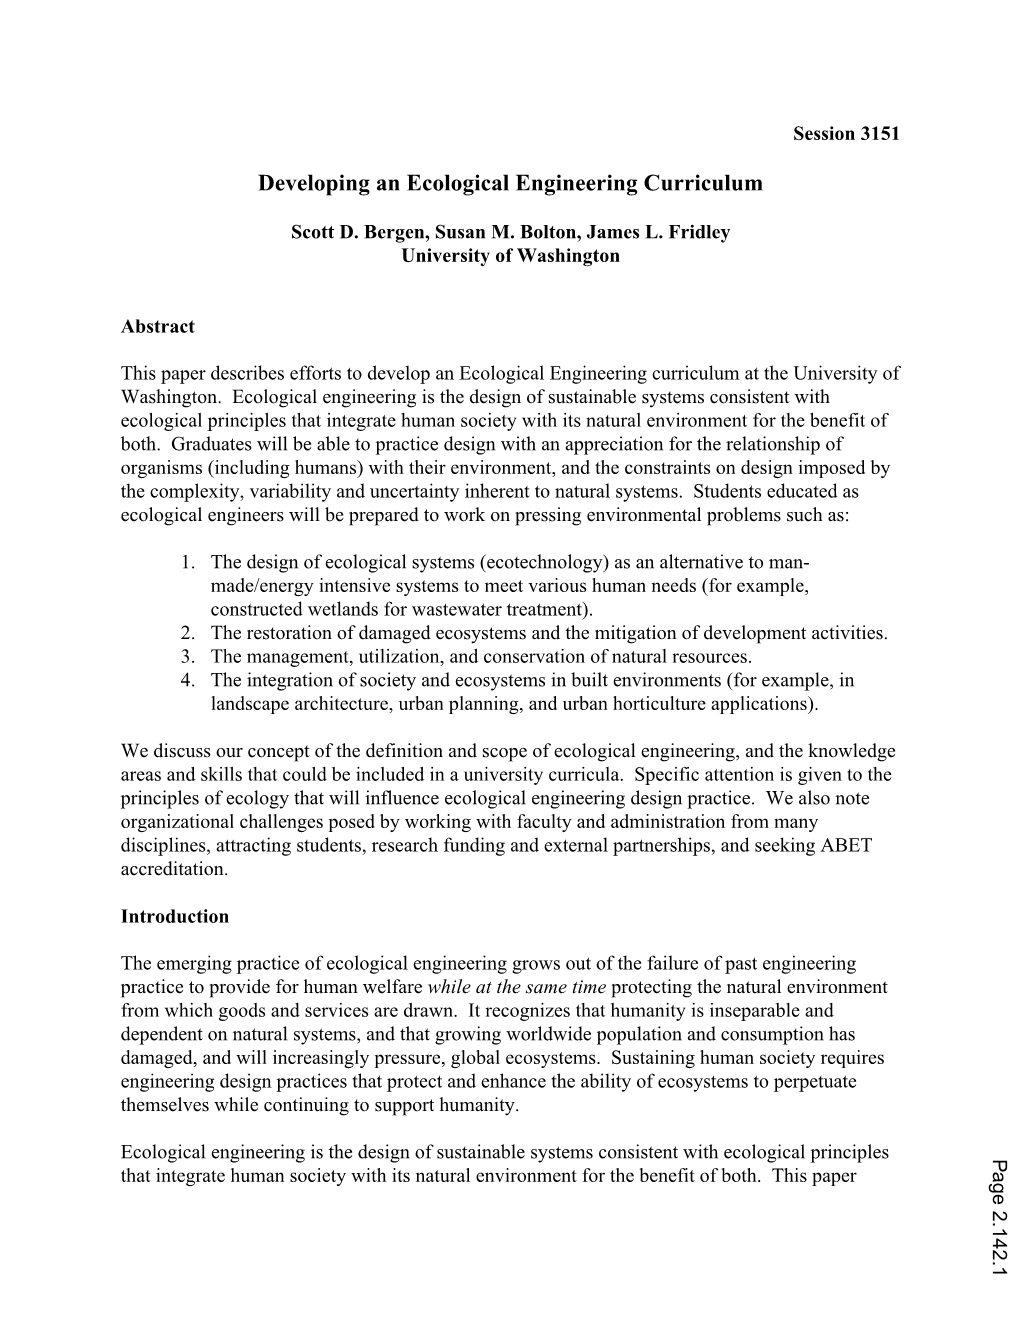 Developing an Ecological Engineering Curriculum